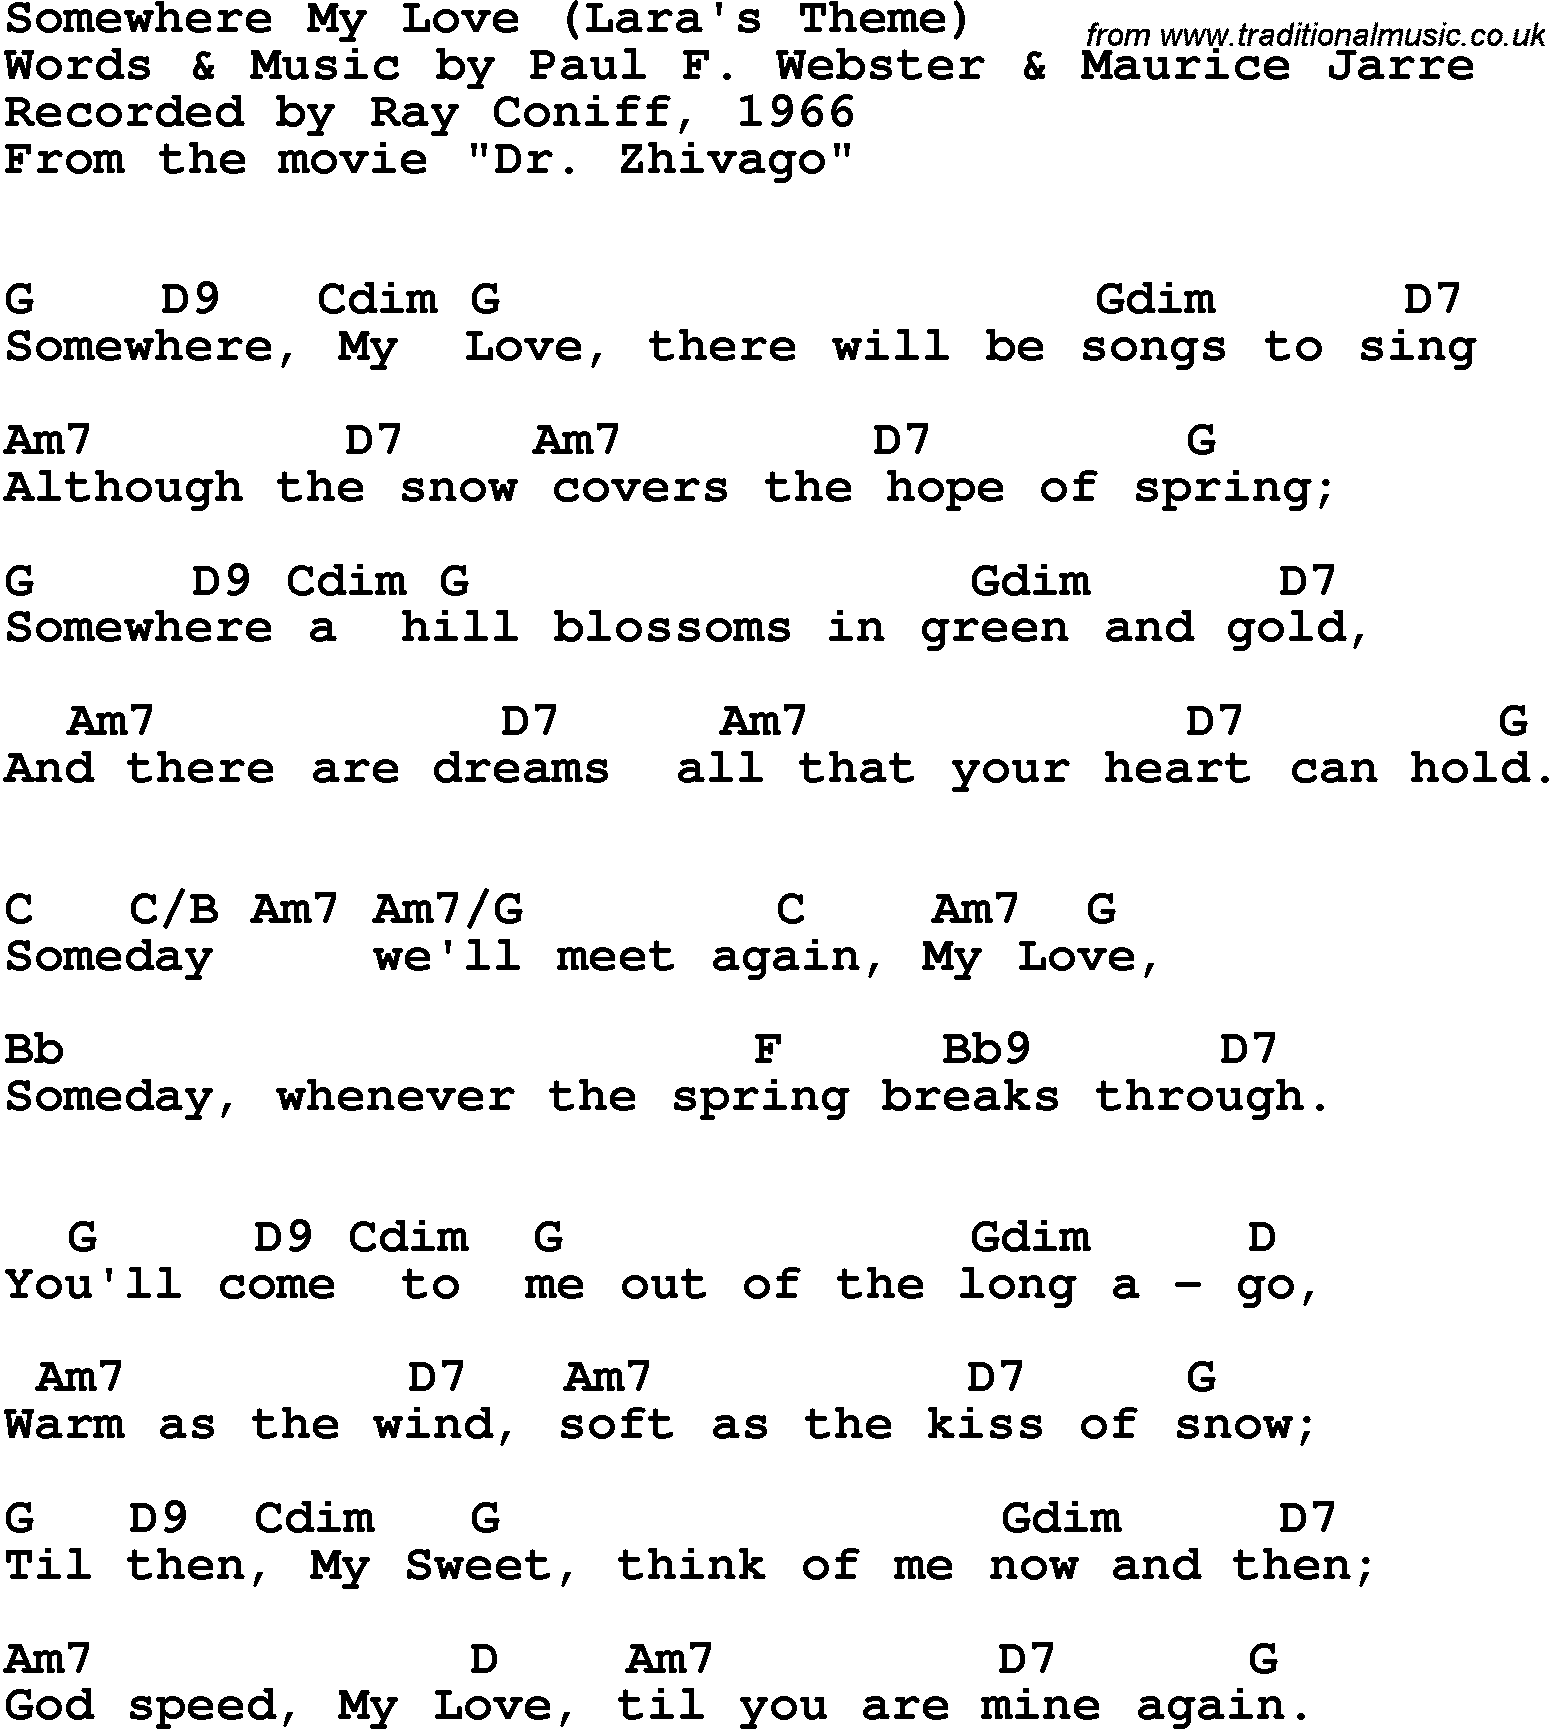 Song Lyrics with guitar chords for Somewhere My Love - Ray Coniff, 1966